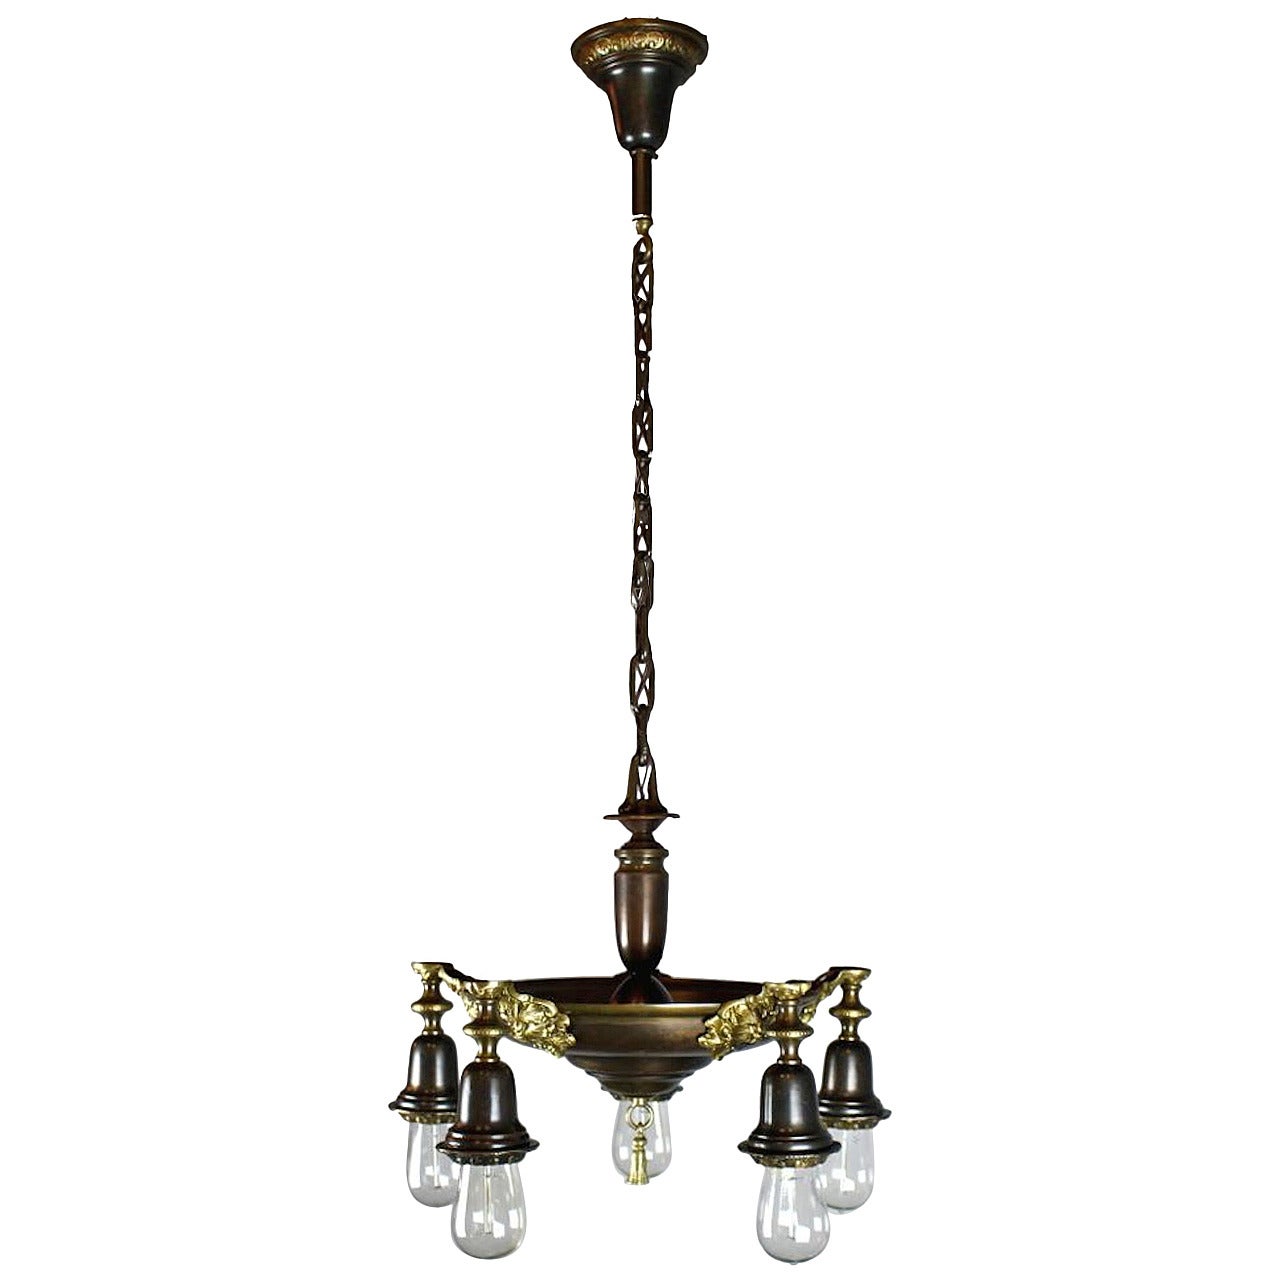 Two-Tone Edwardian Five-Light Pan Fixture with Bare Bulbs